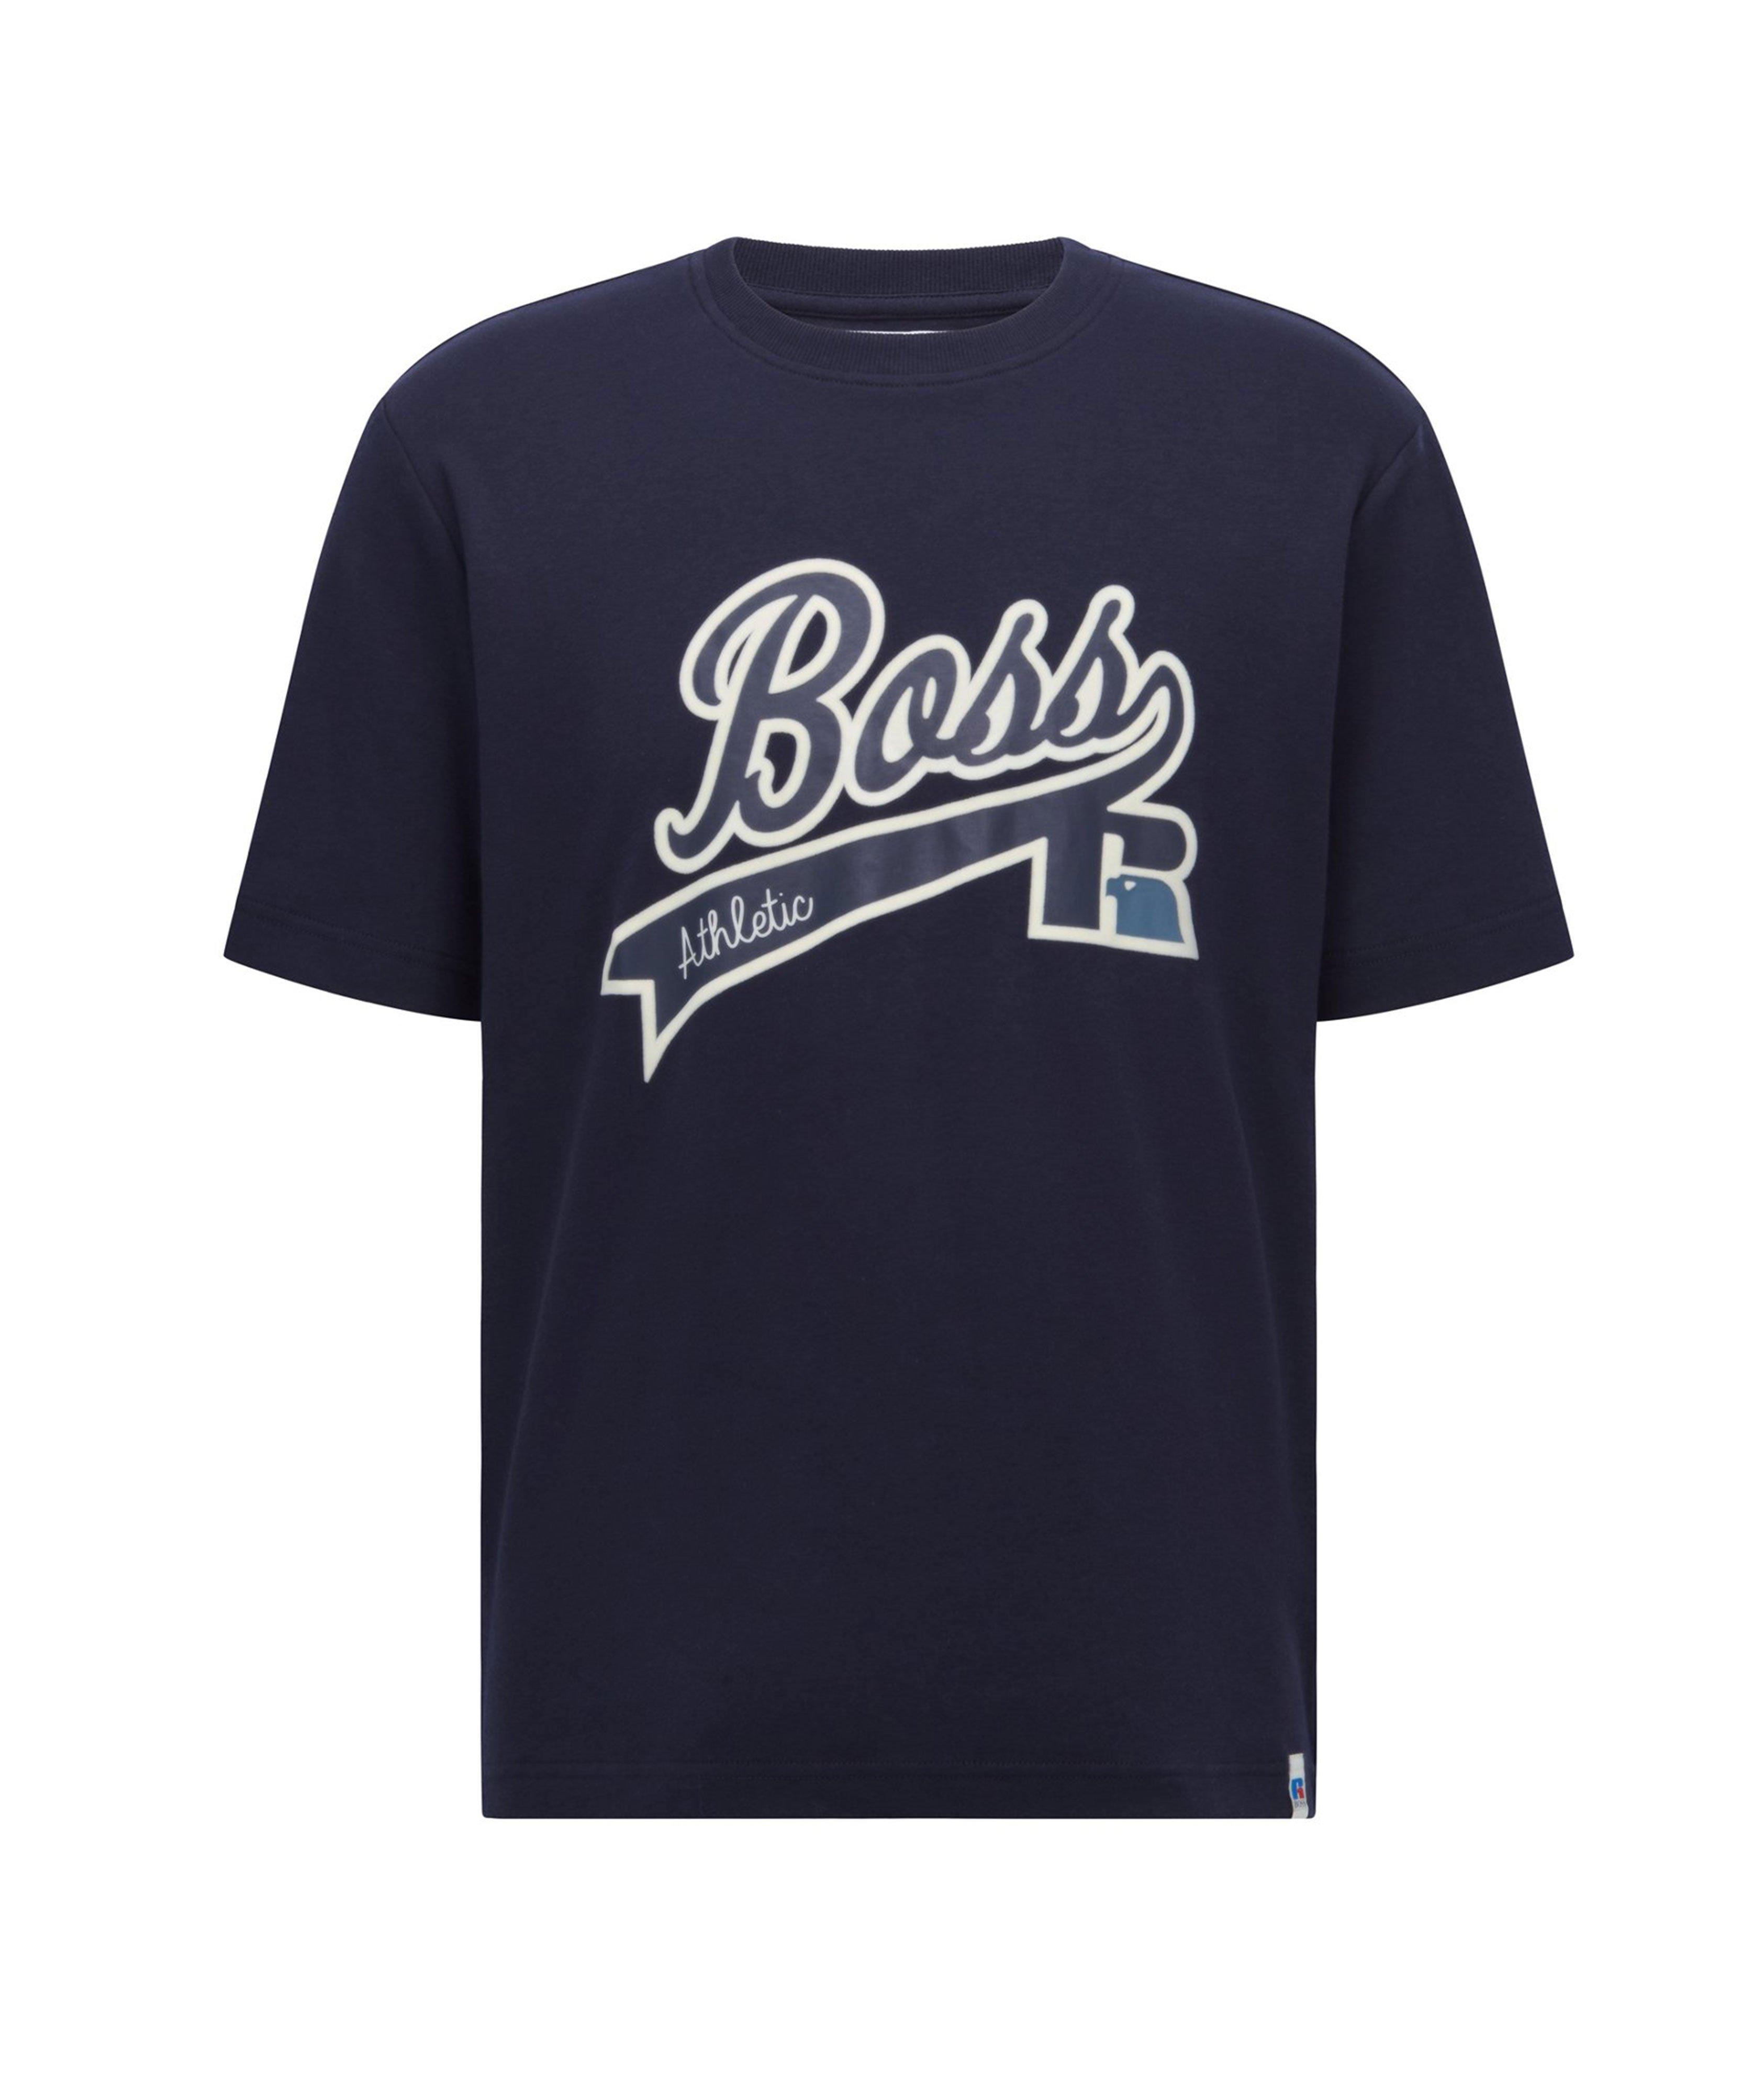 BOSS x Russell Athletic Logo Cotton T-Shirt image 0